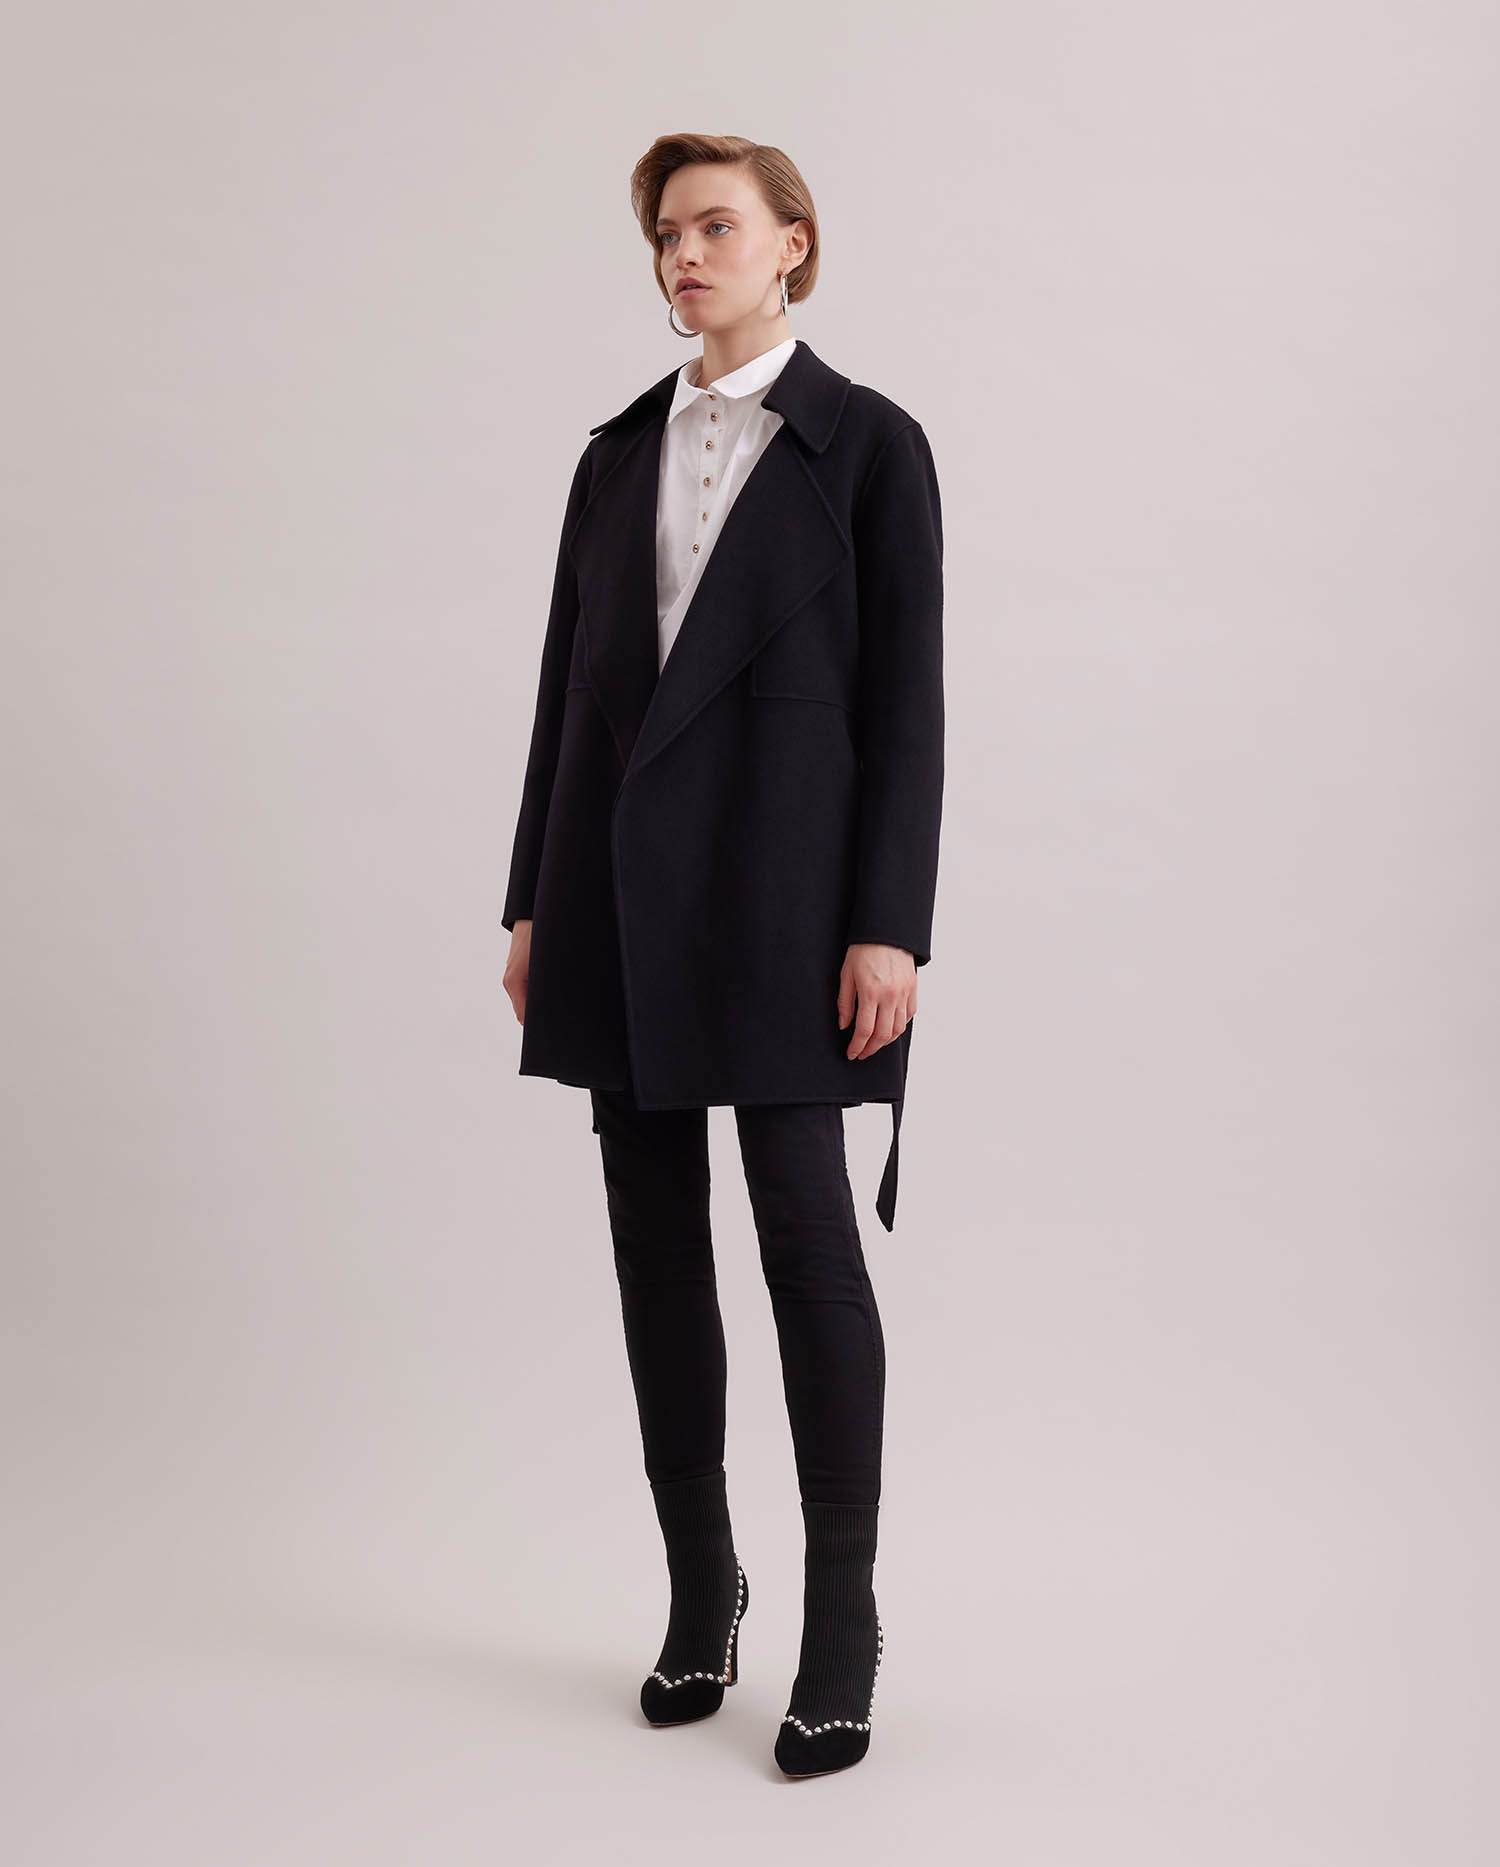 Discover The GALLERY Long double breasted wool coat with zipper sleeves and tie-waist belt from ANNE FONTAINE